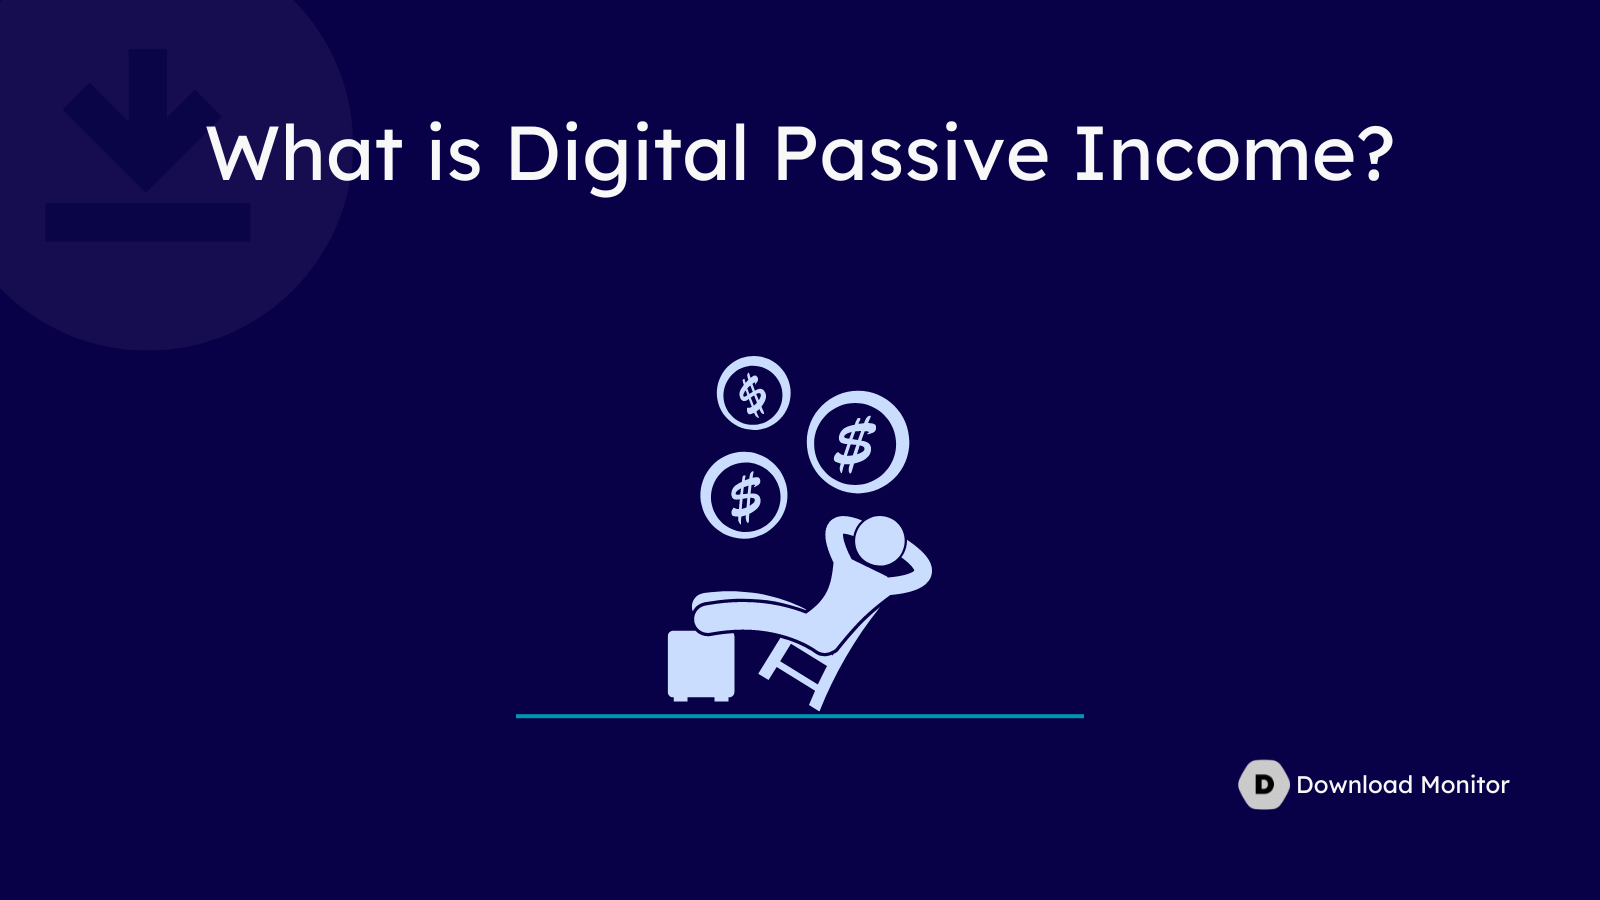 What is Digital Passive Income?